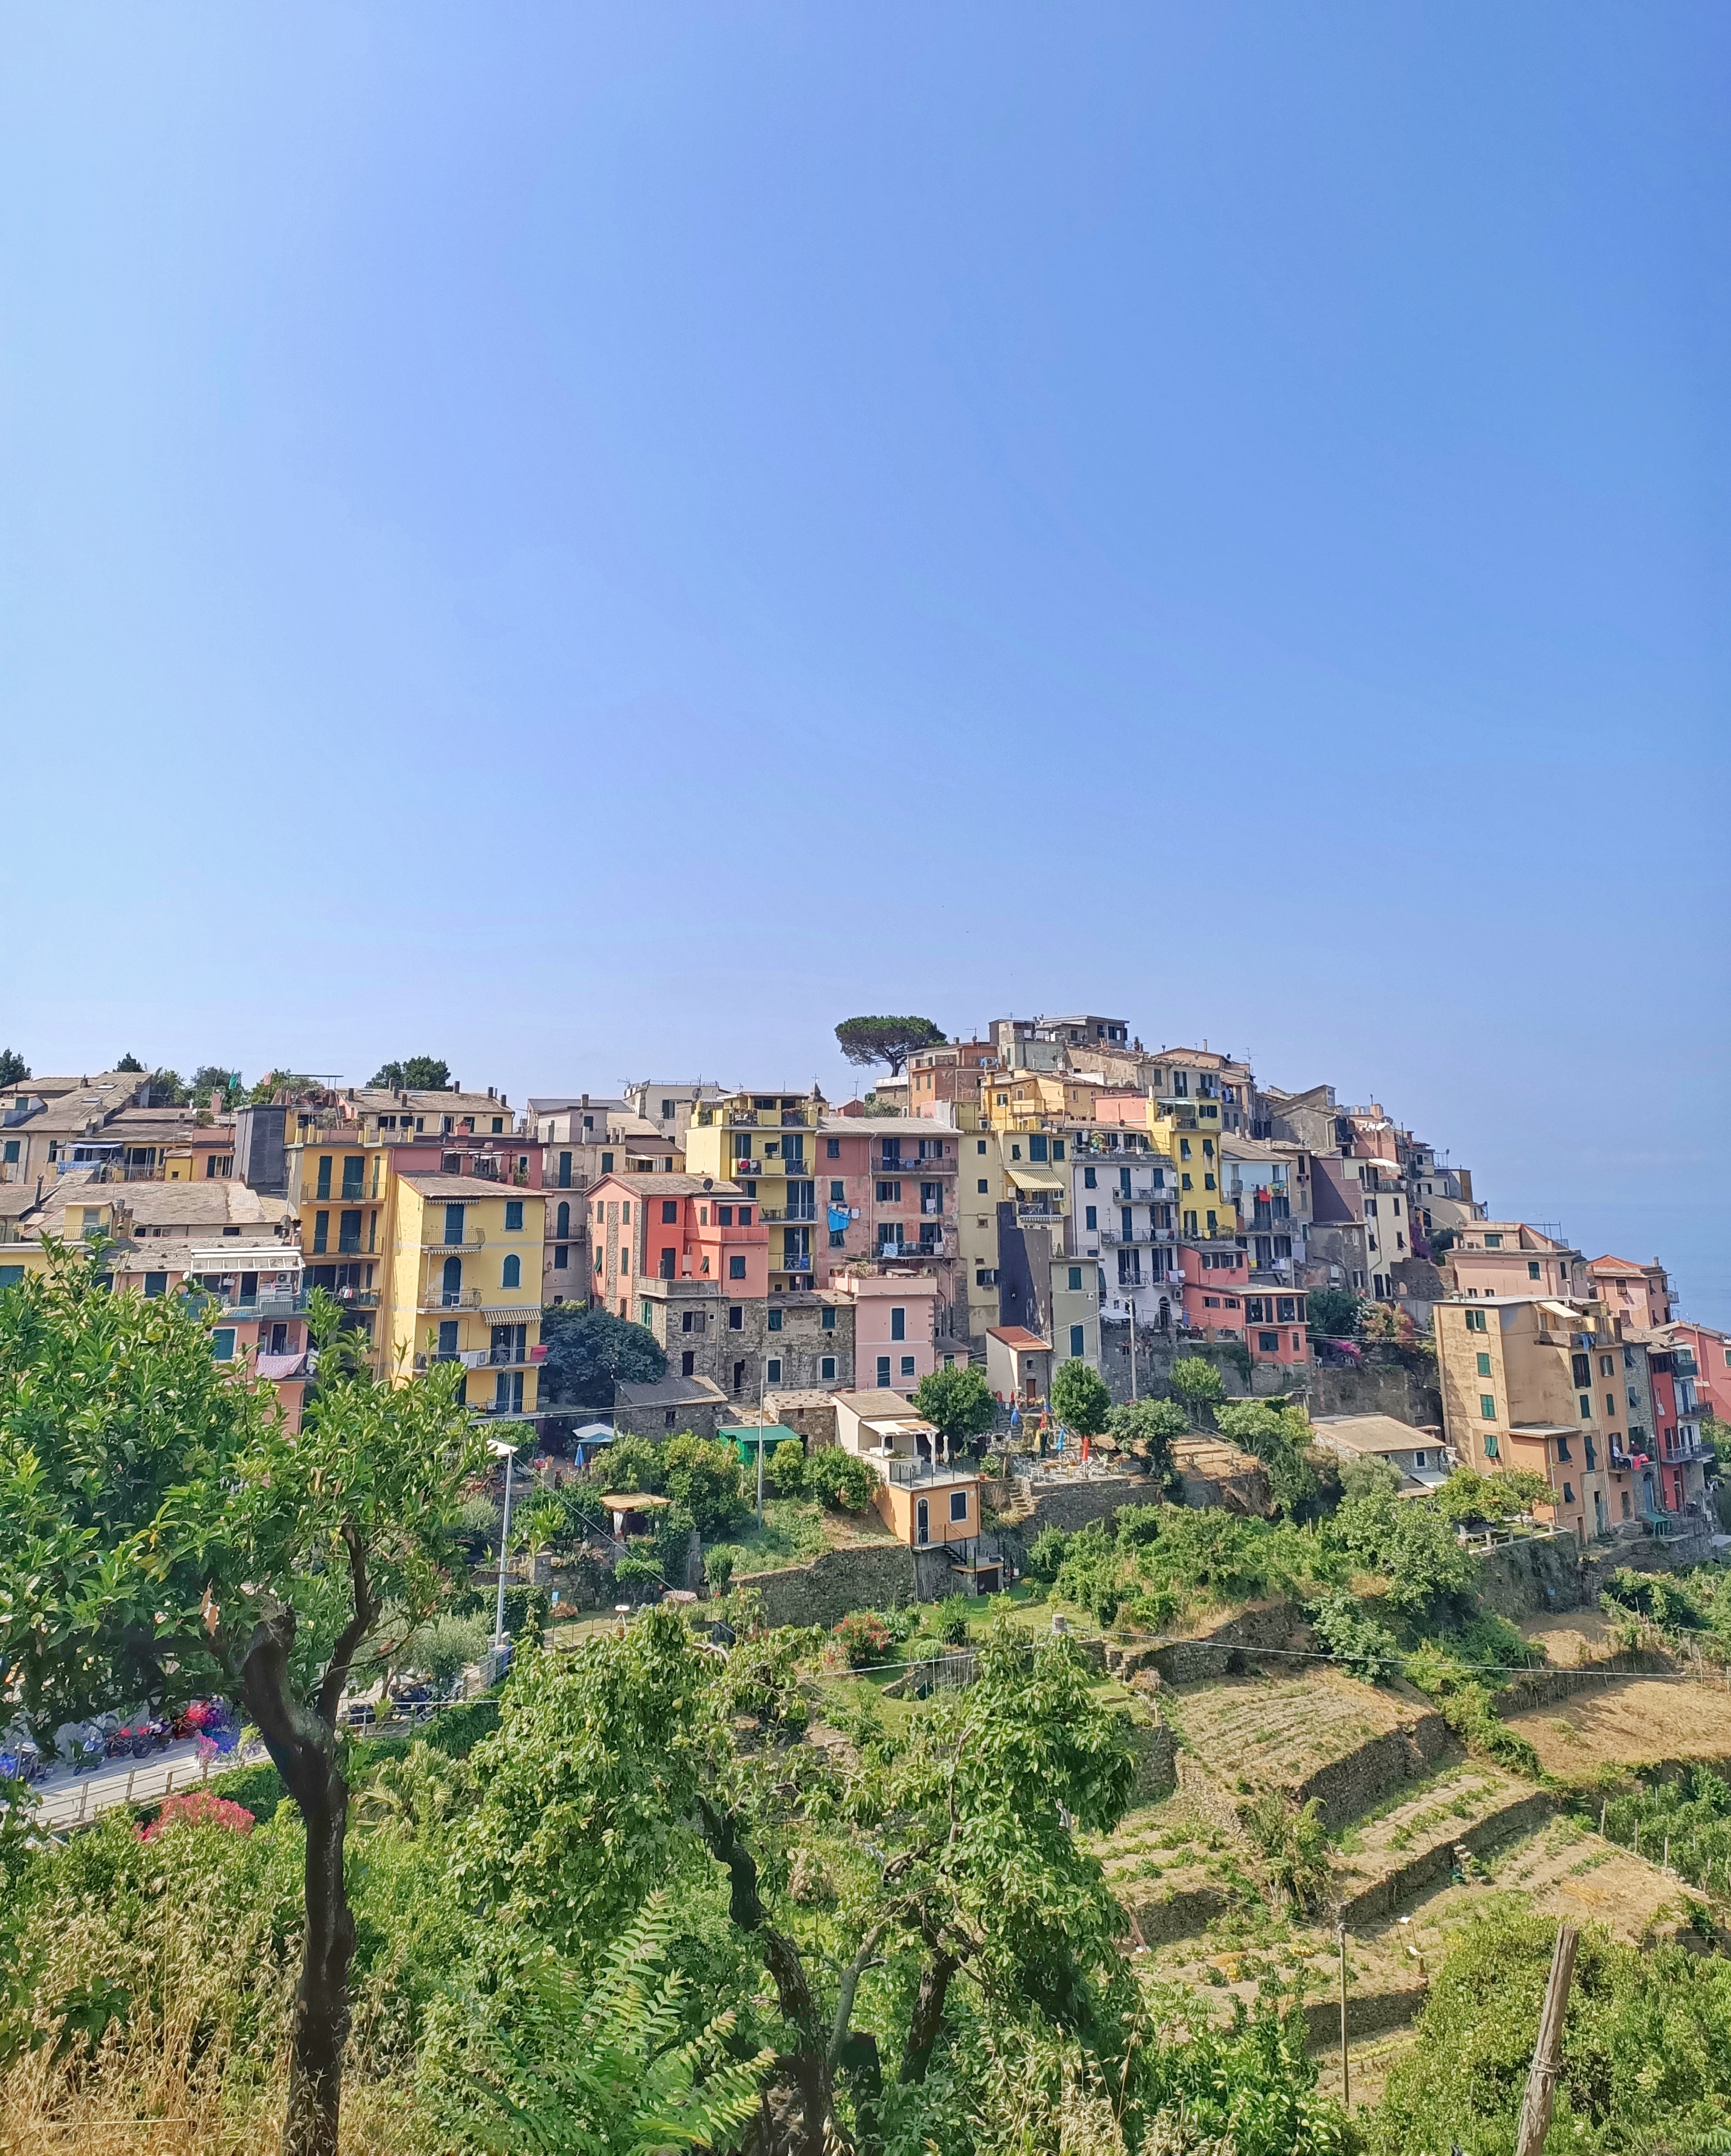 The village of Corniglia in the Cinque Terre, with its colourful houses and terraced vineyards on top of the hill.